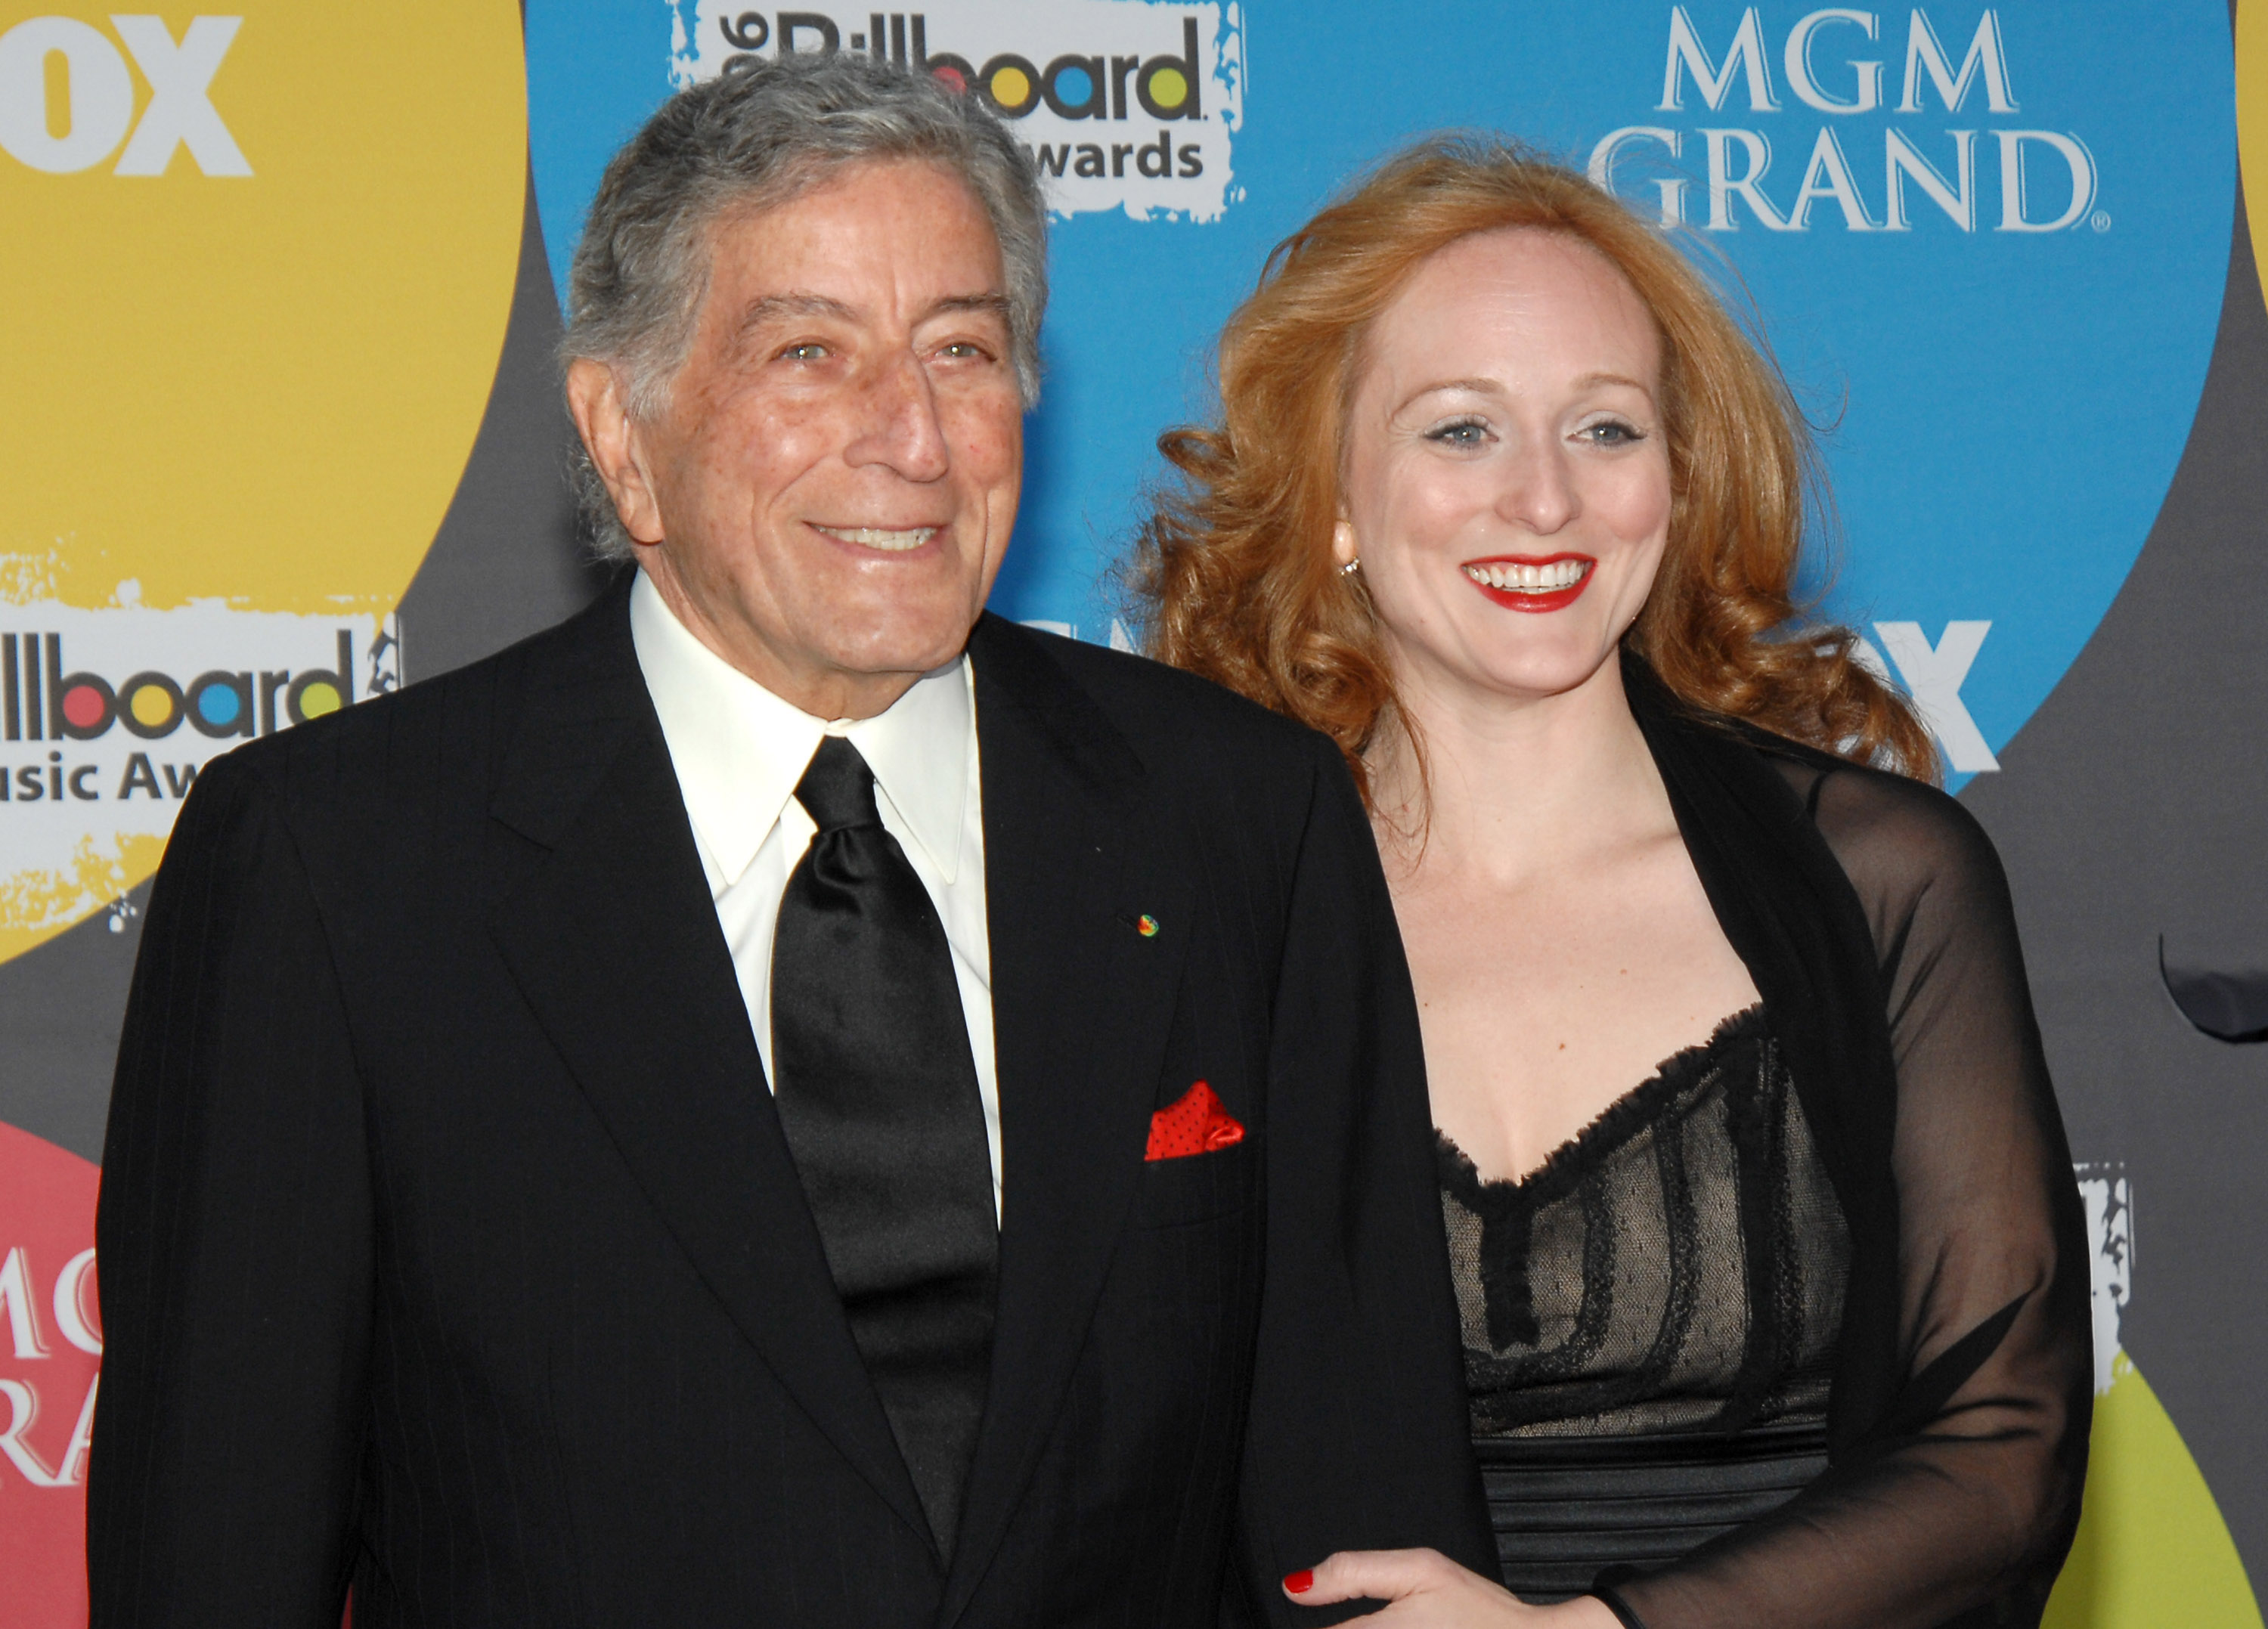 Tony and Antonia Bennett at the 2006 Billboard Music Awards in Las Vegas, Nevada. | Source: Getty Images